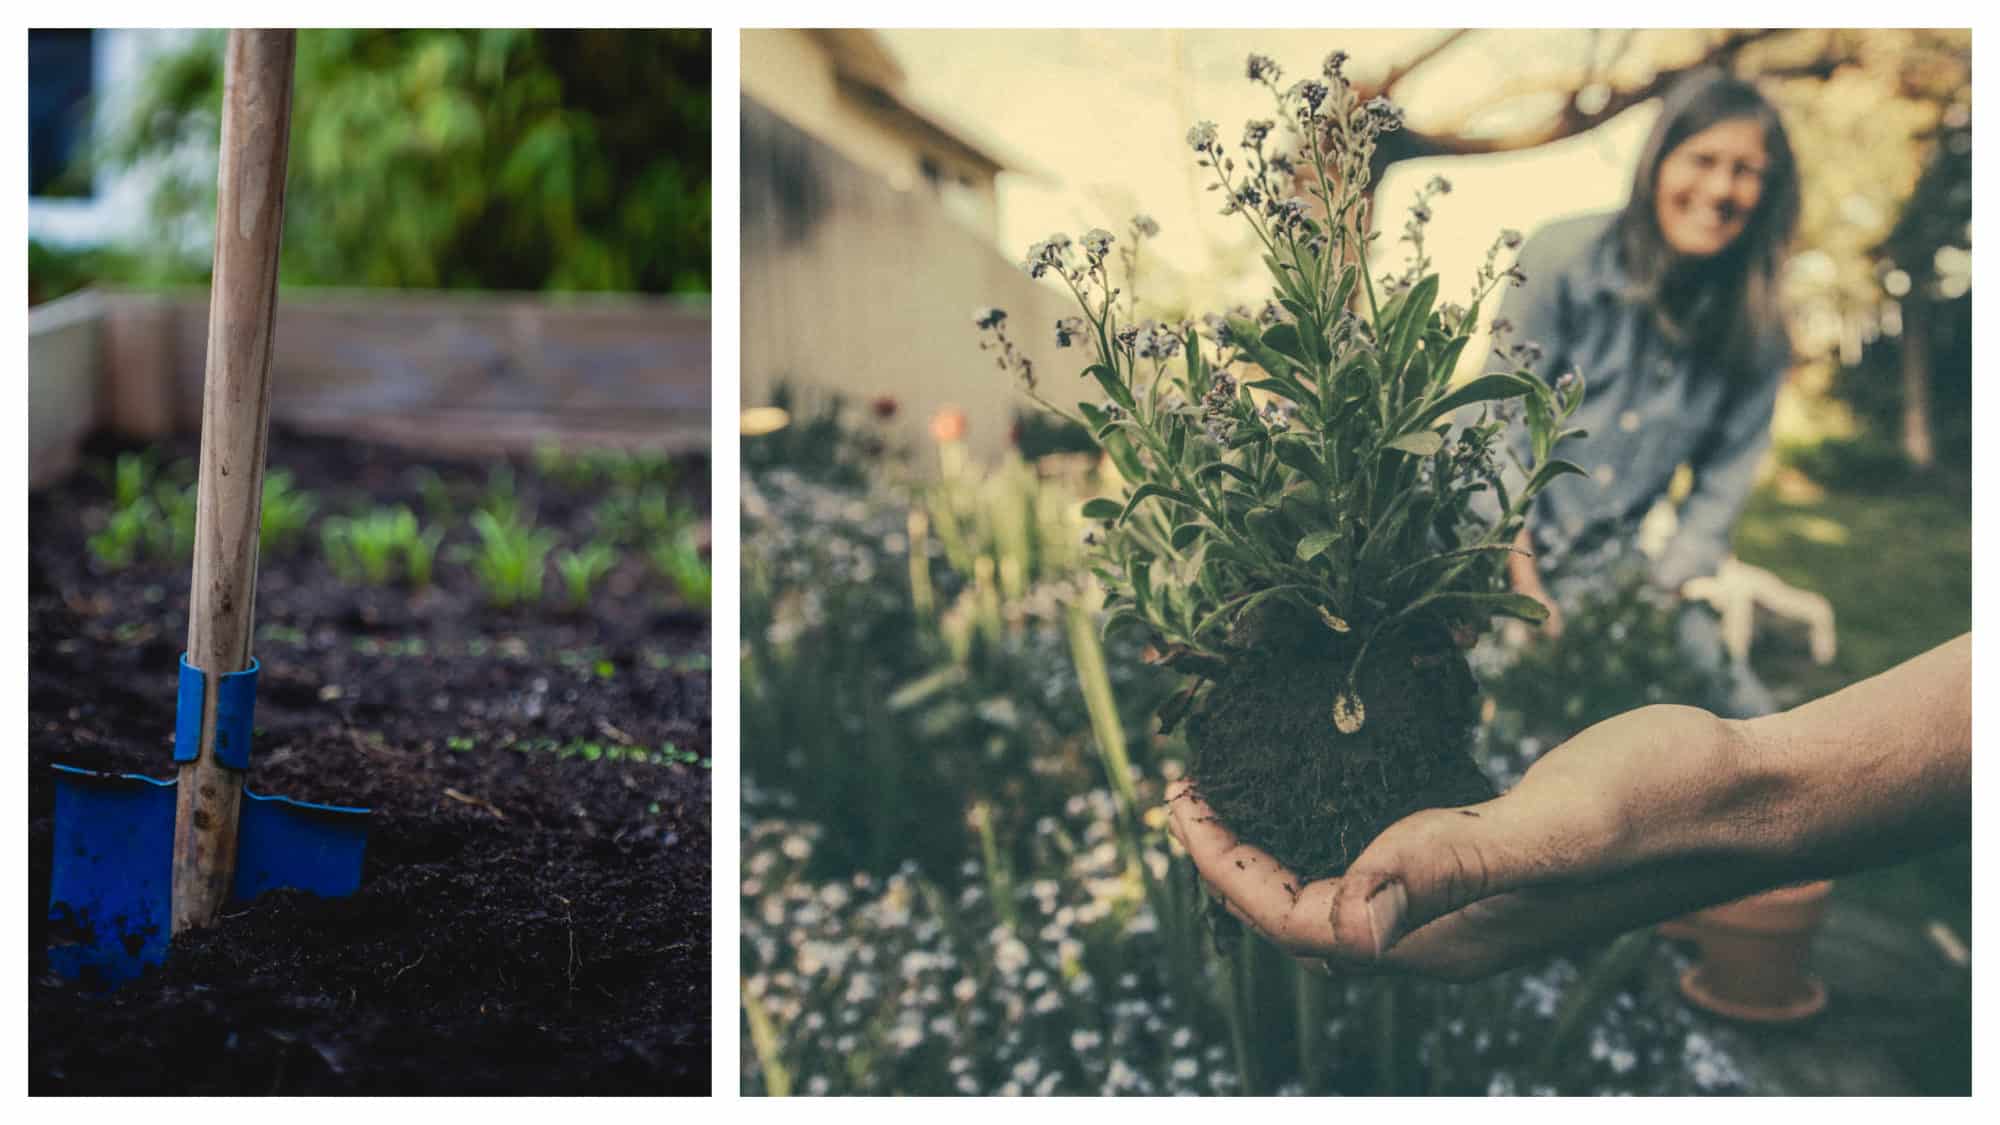 A blue shovel sticking out from a vegetable patch (left). Beautiful flower bulbs being held by a hand, with a woman smiling in the background (right).